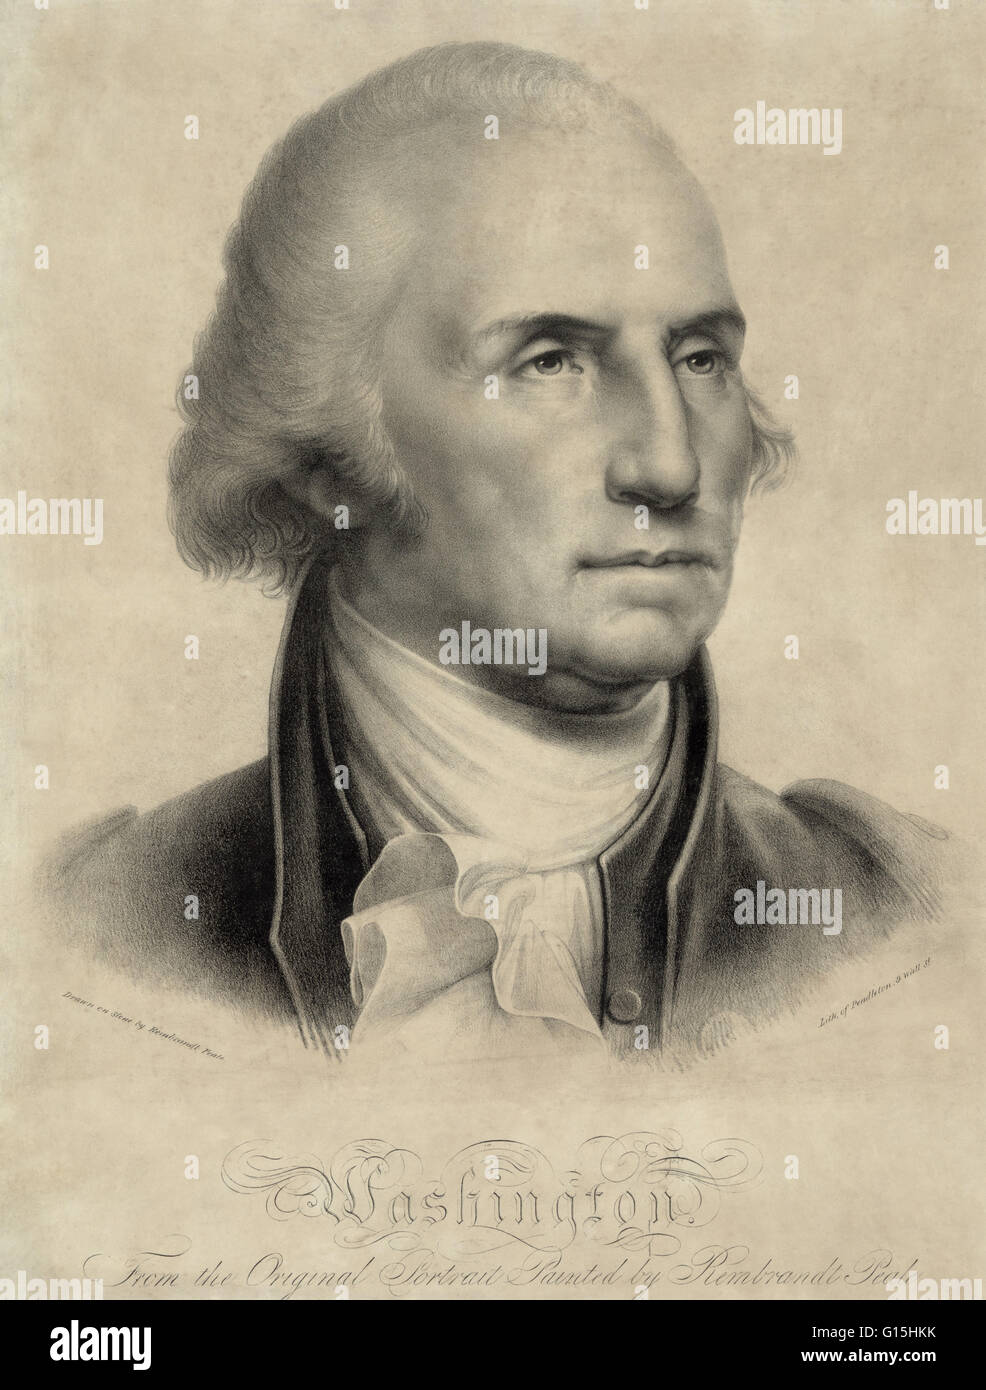 George Washington (February 22, 1732 - December 14, 1799) was the first President of the United States of America, serving from 1789 to 1797, and dominant military and political leader of the United States from 1775 to 1799. He led the American victory ov Stock Photo